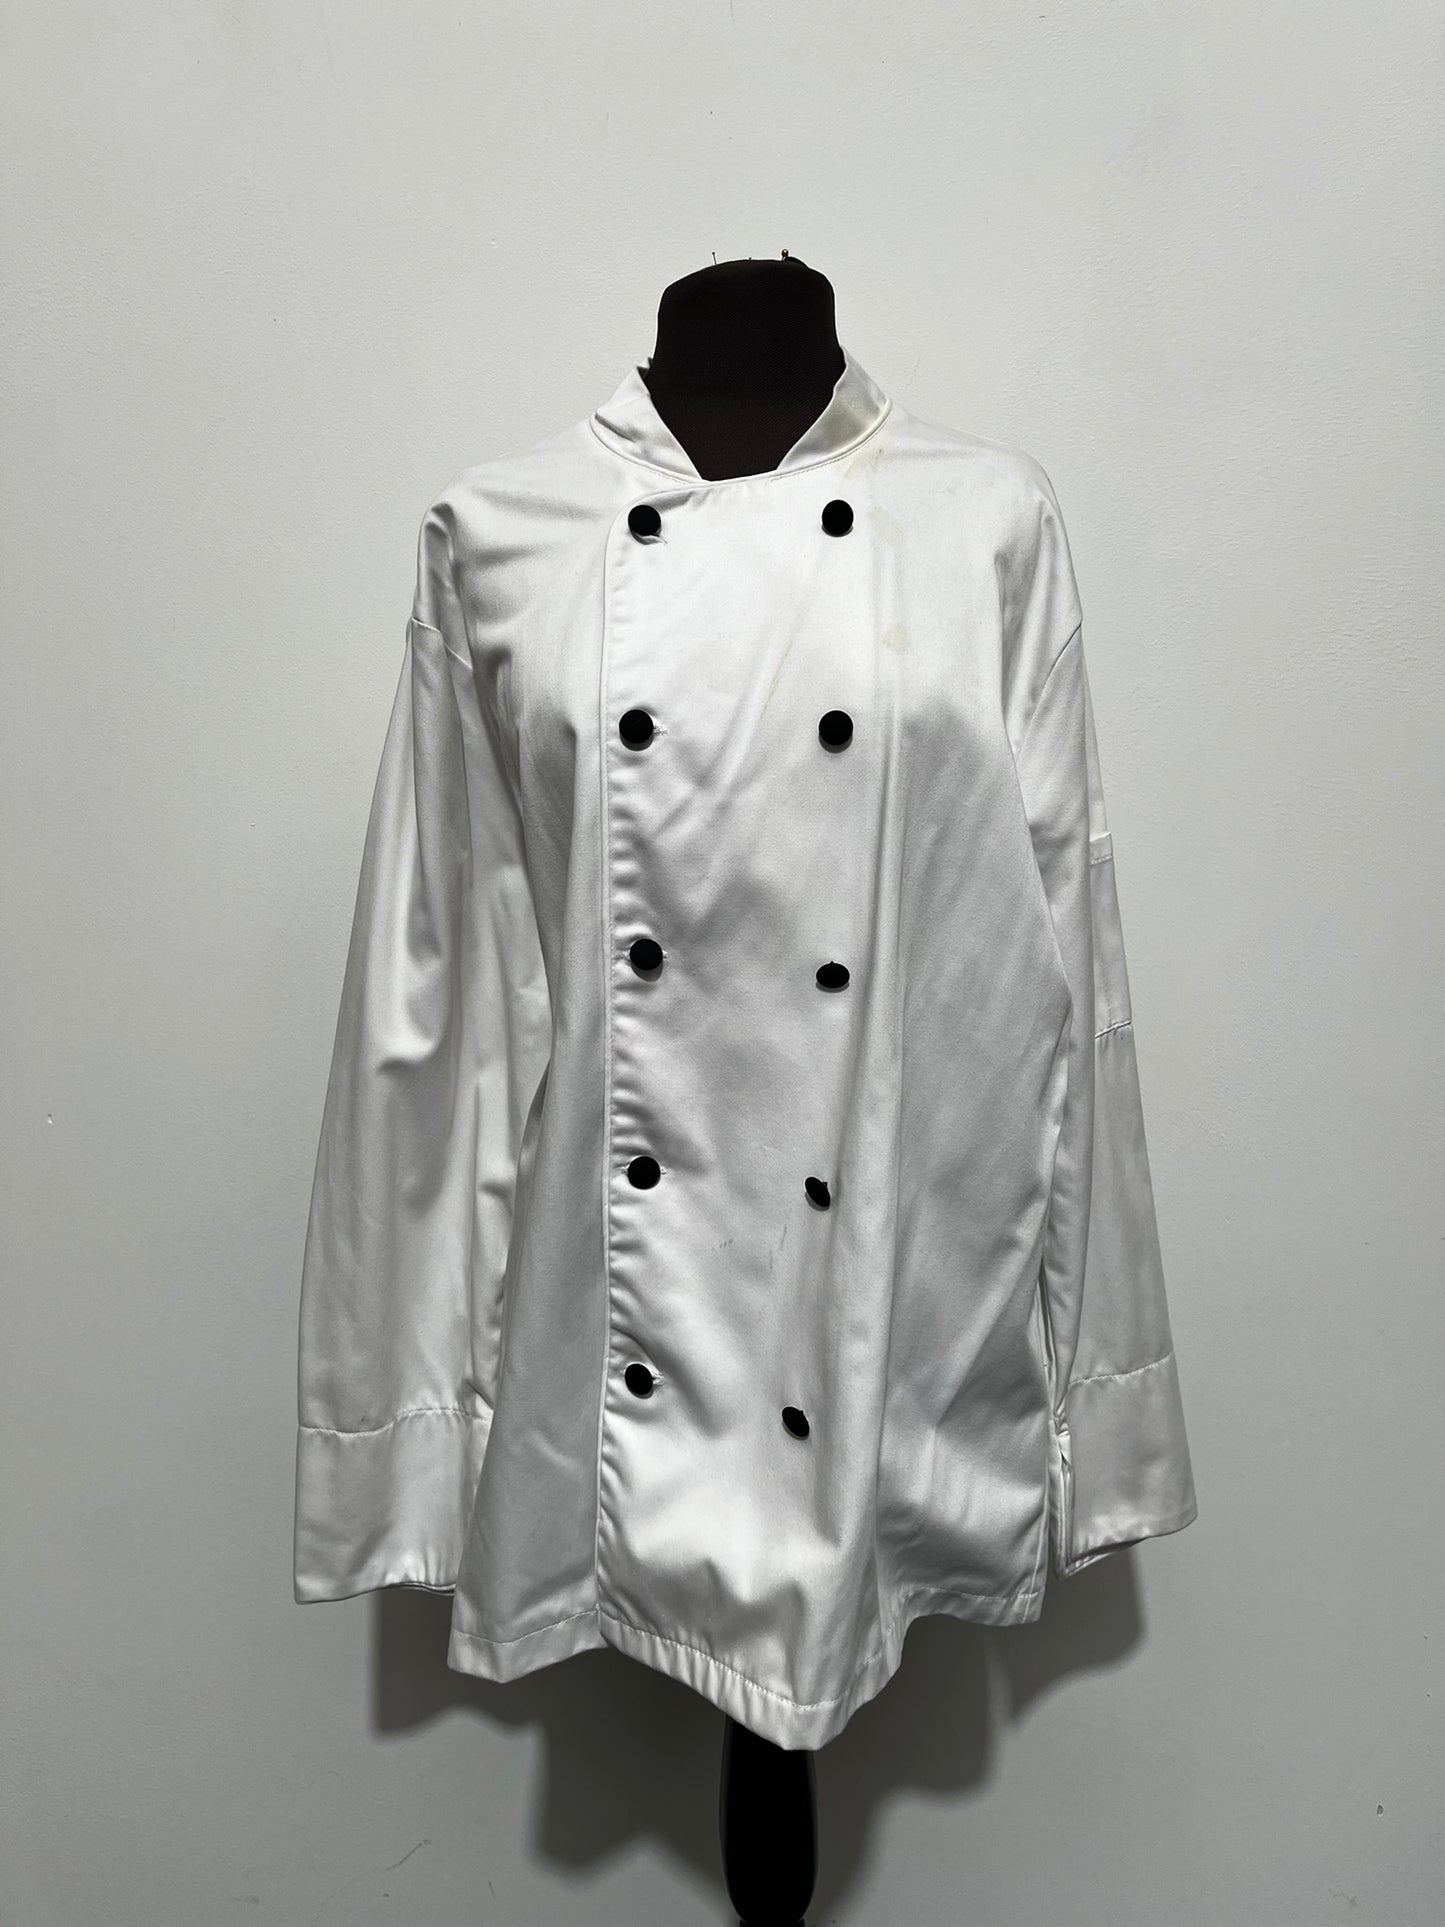 Authentic Chef Whites Uniform in USED Condition Size L/XL